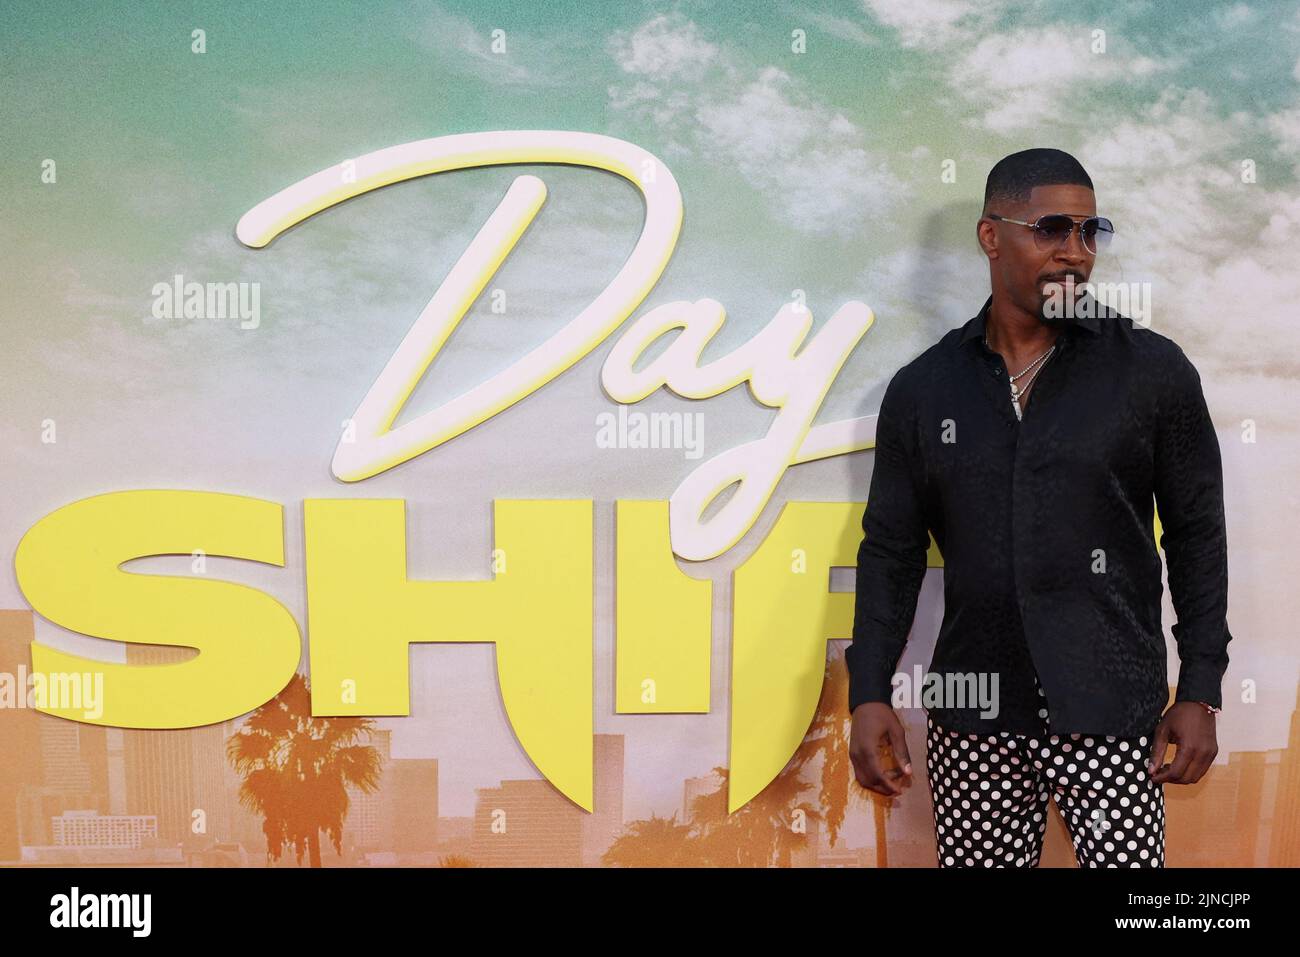 Cast member Jamie Foxx attends the premiere for the film Day Shift in Los Angeles, California, U.S., August 10, 2022. REUTERS/Mario Anzuoni Stock Photo